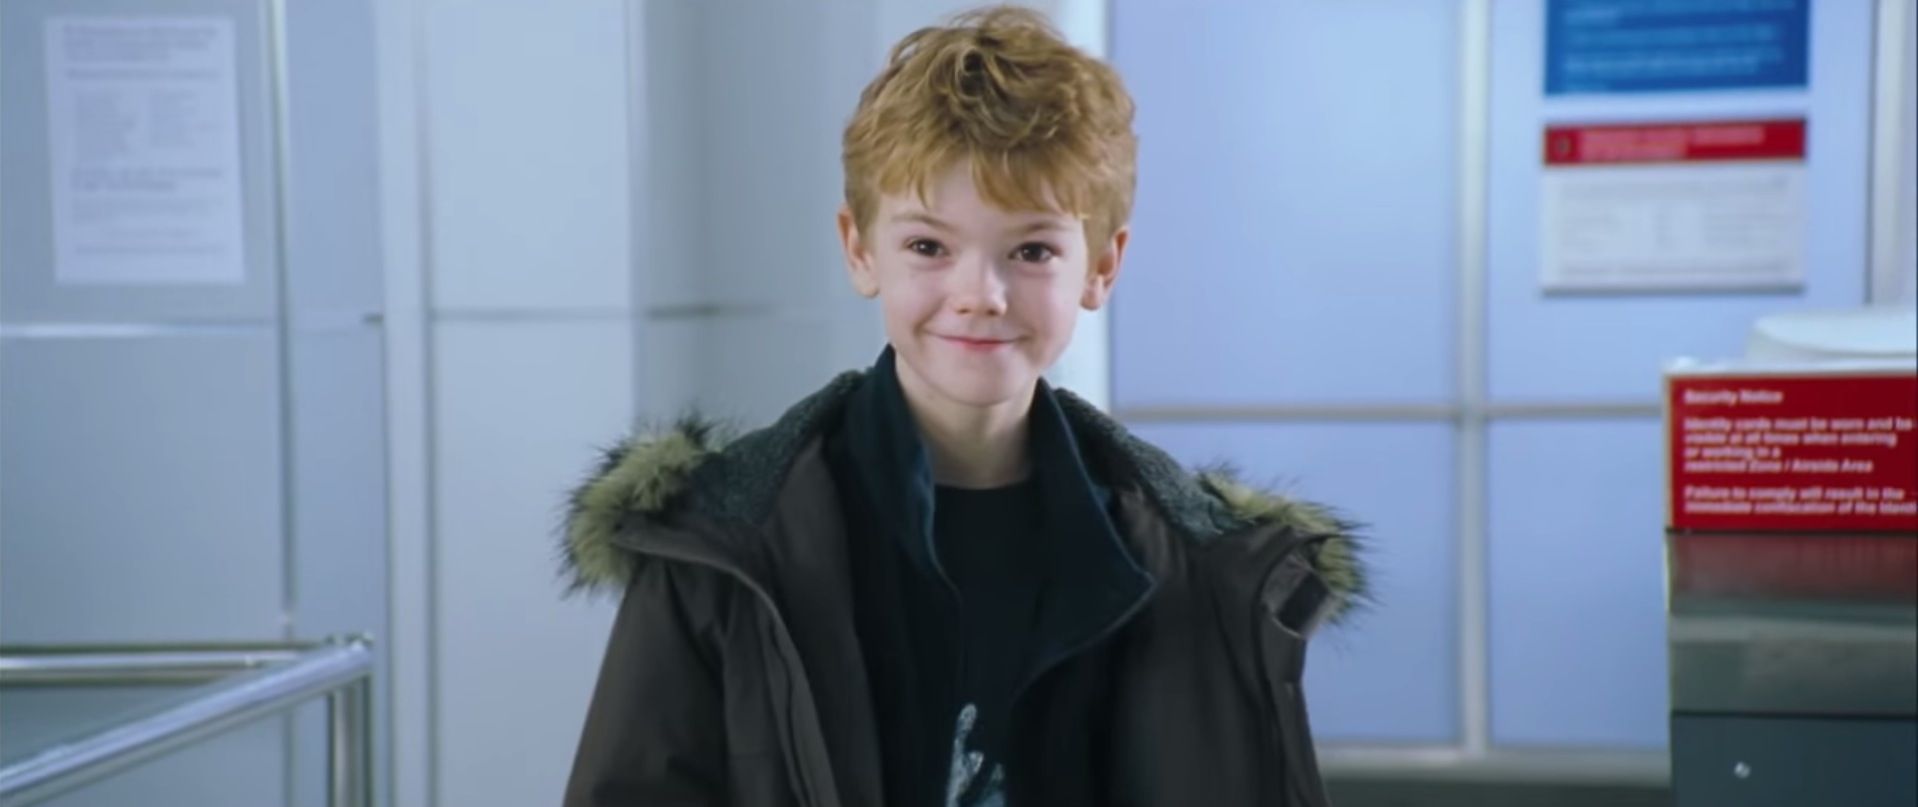 Oh No, I Had Inappropriate Thoughts About The Love Actually Kid